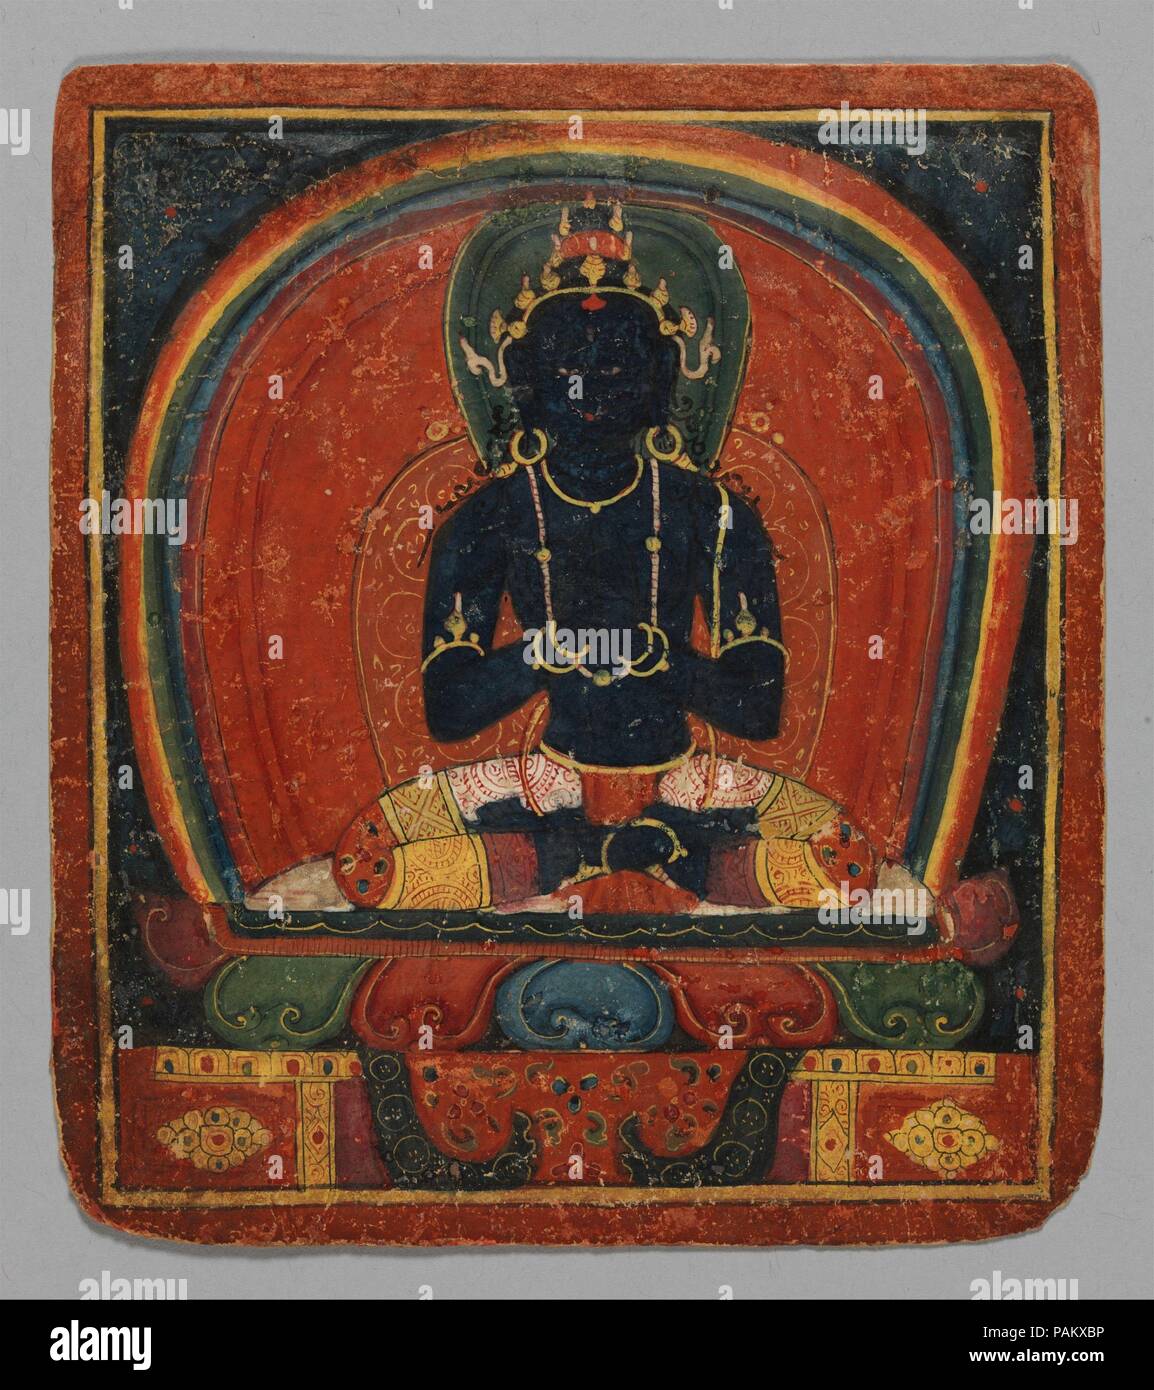 Initiation Card (Tsakalis): Samanthabhadri (Consort). Culture: Tibet. Dimensions: Each 6 1/4 x 5 3/4 in. (16 x 14.5 cm). Date: early 15th century.  Tsakali cards were used by itinerant teachers moving from one monastery to another in order to evoke Vajrayana Buddhist deities. When laid on the ground in the form of a mandala, as seen here, they functioned to create a fixed sacred space like that of a temple. The deities shown on these initiation cards include the Tathagata Buddhas, various bodhisattvas, fierce protectors, and the six possible realms of rebirth seen across the bottom. They proba Stock Photo